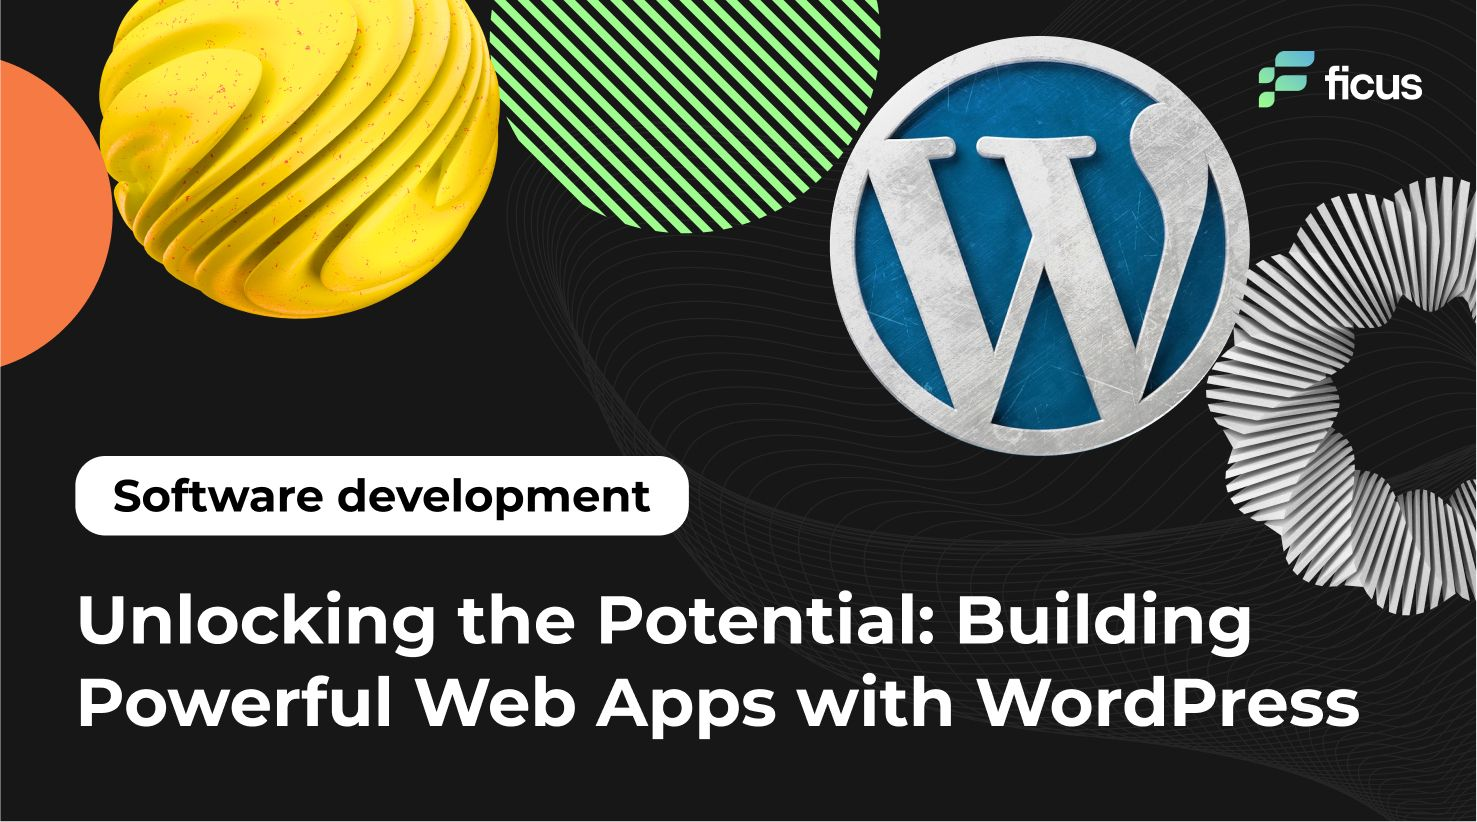 Unlocking the Potential: Building Powerful Web Apps with WordPress